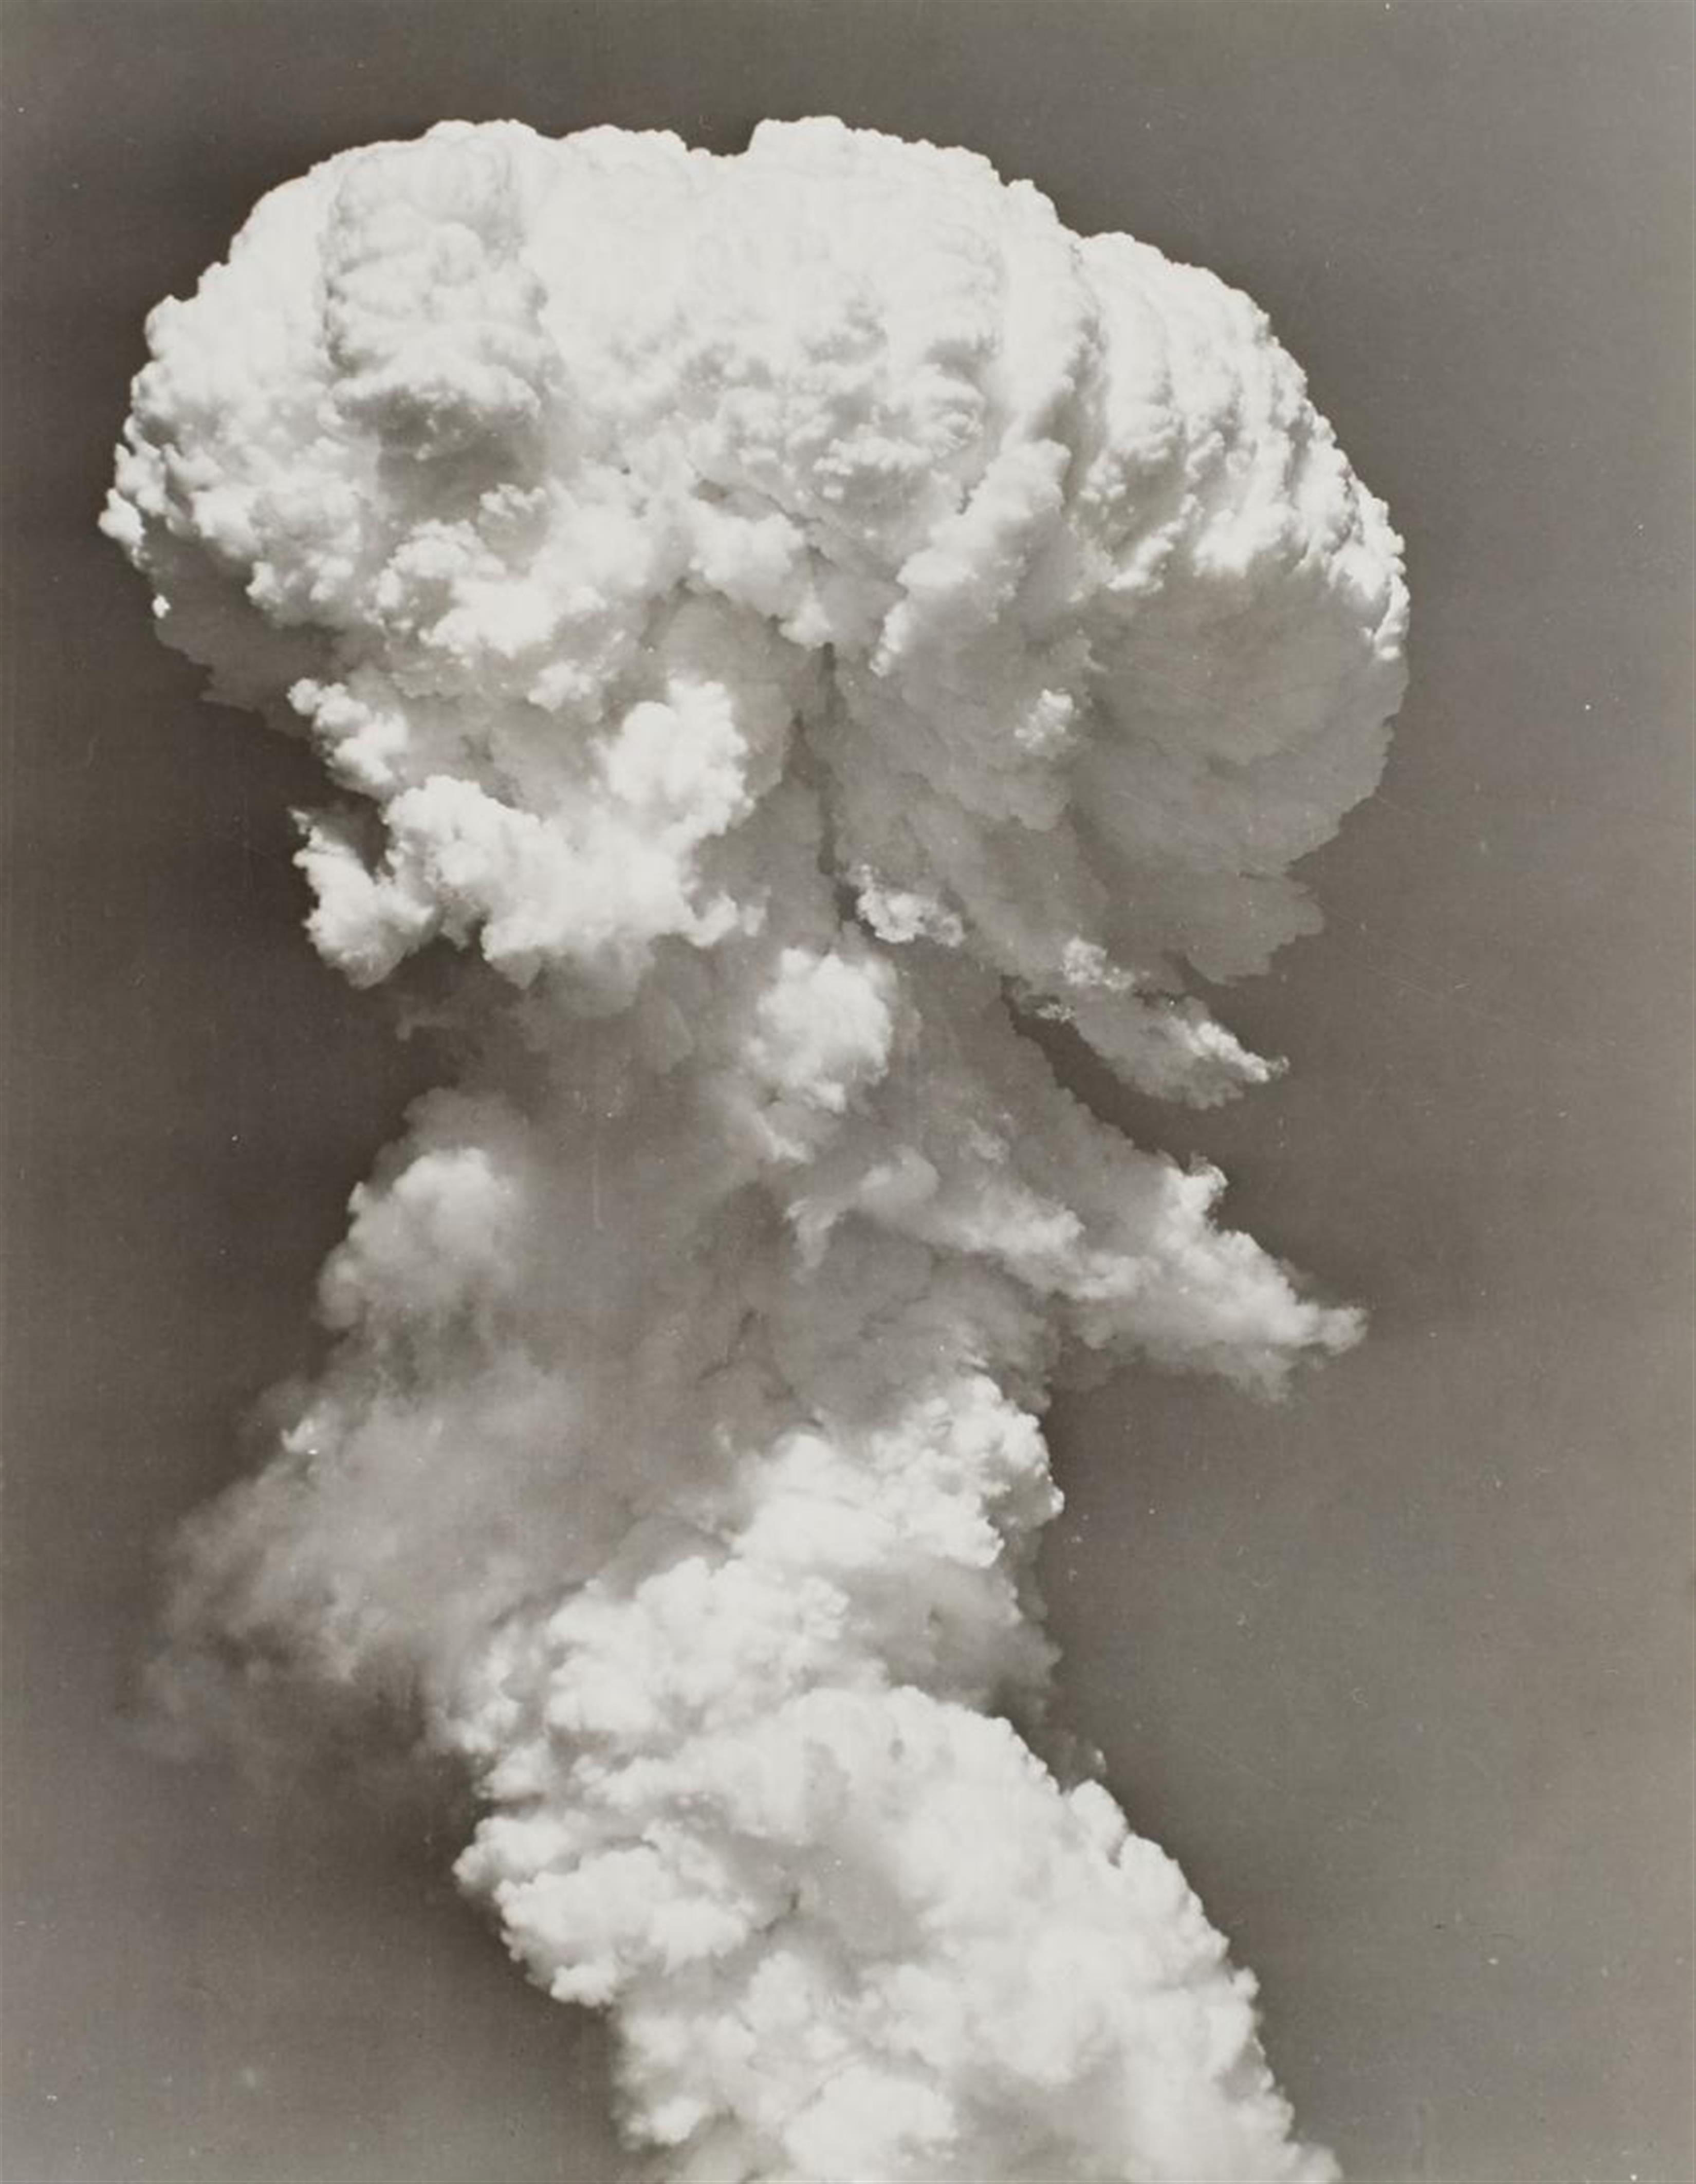 Joint Army Task Force One Photo - The atomic bomb burst - image-1